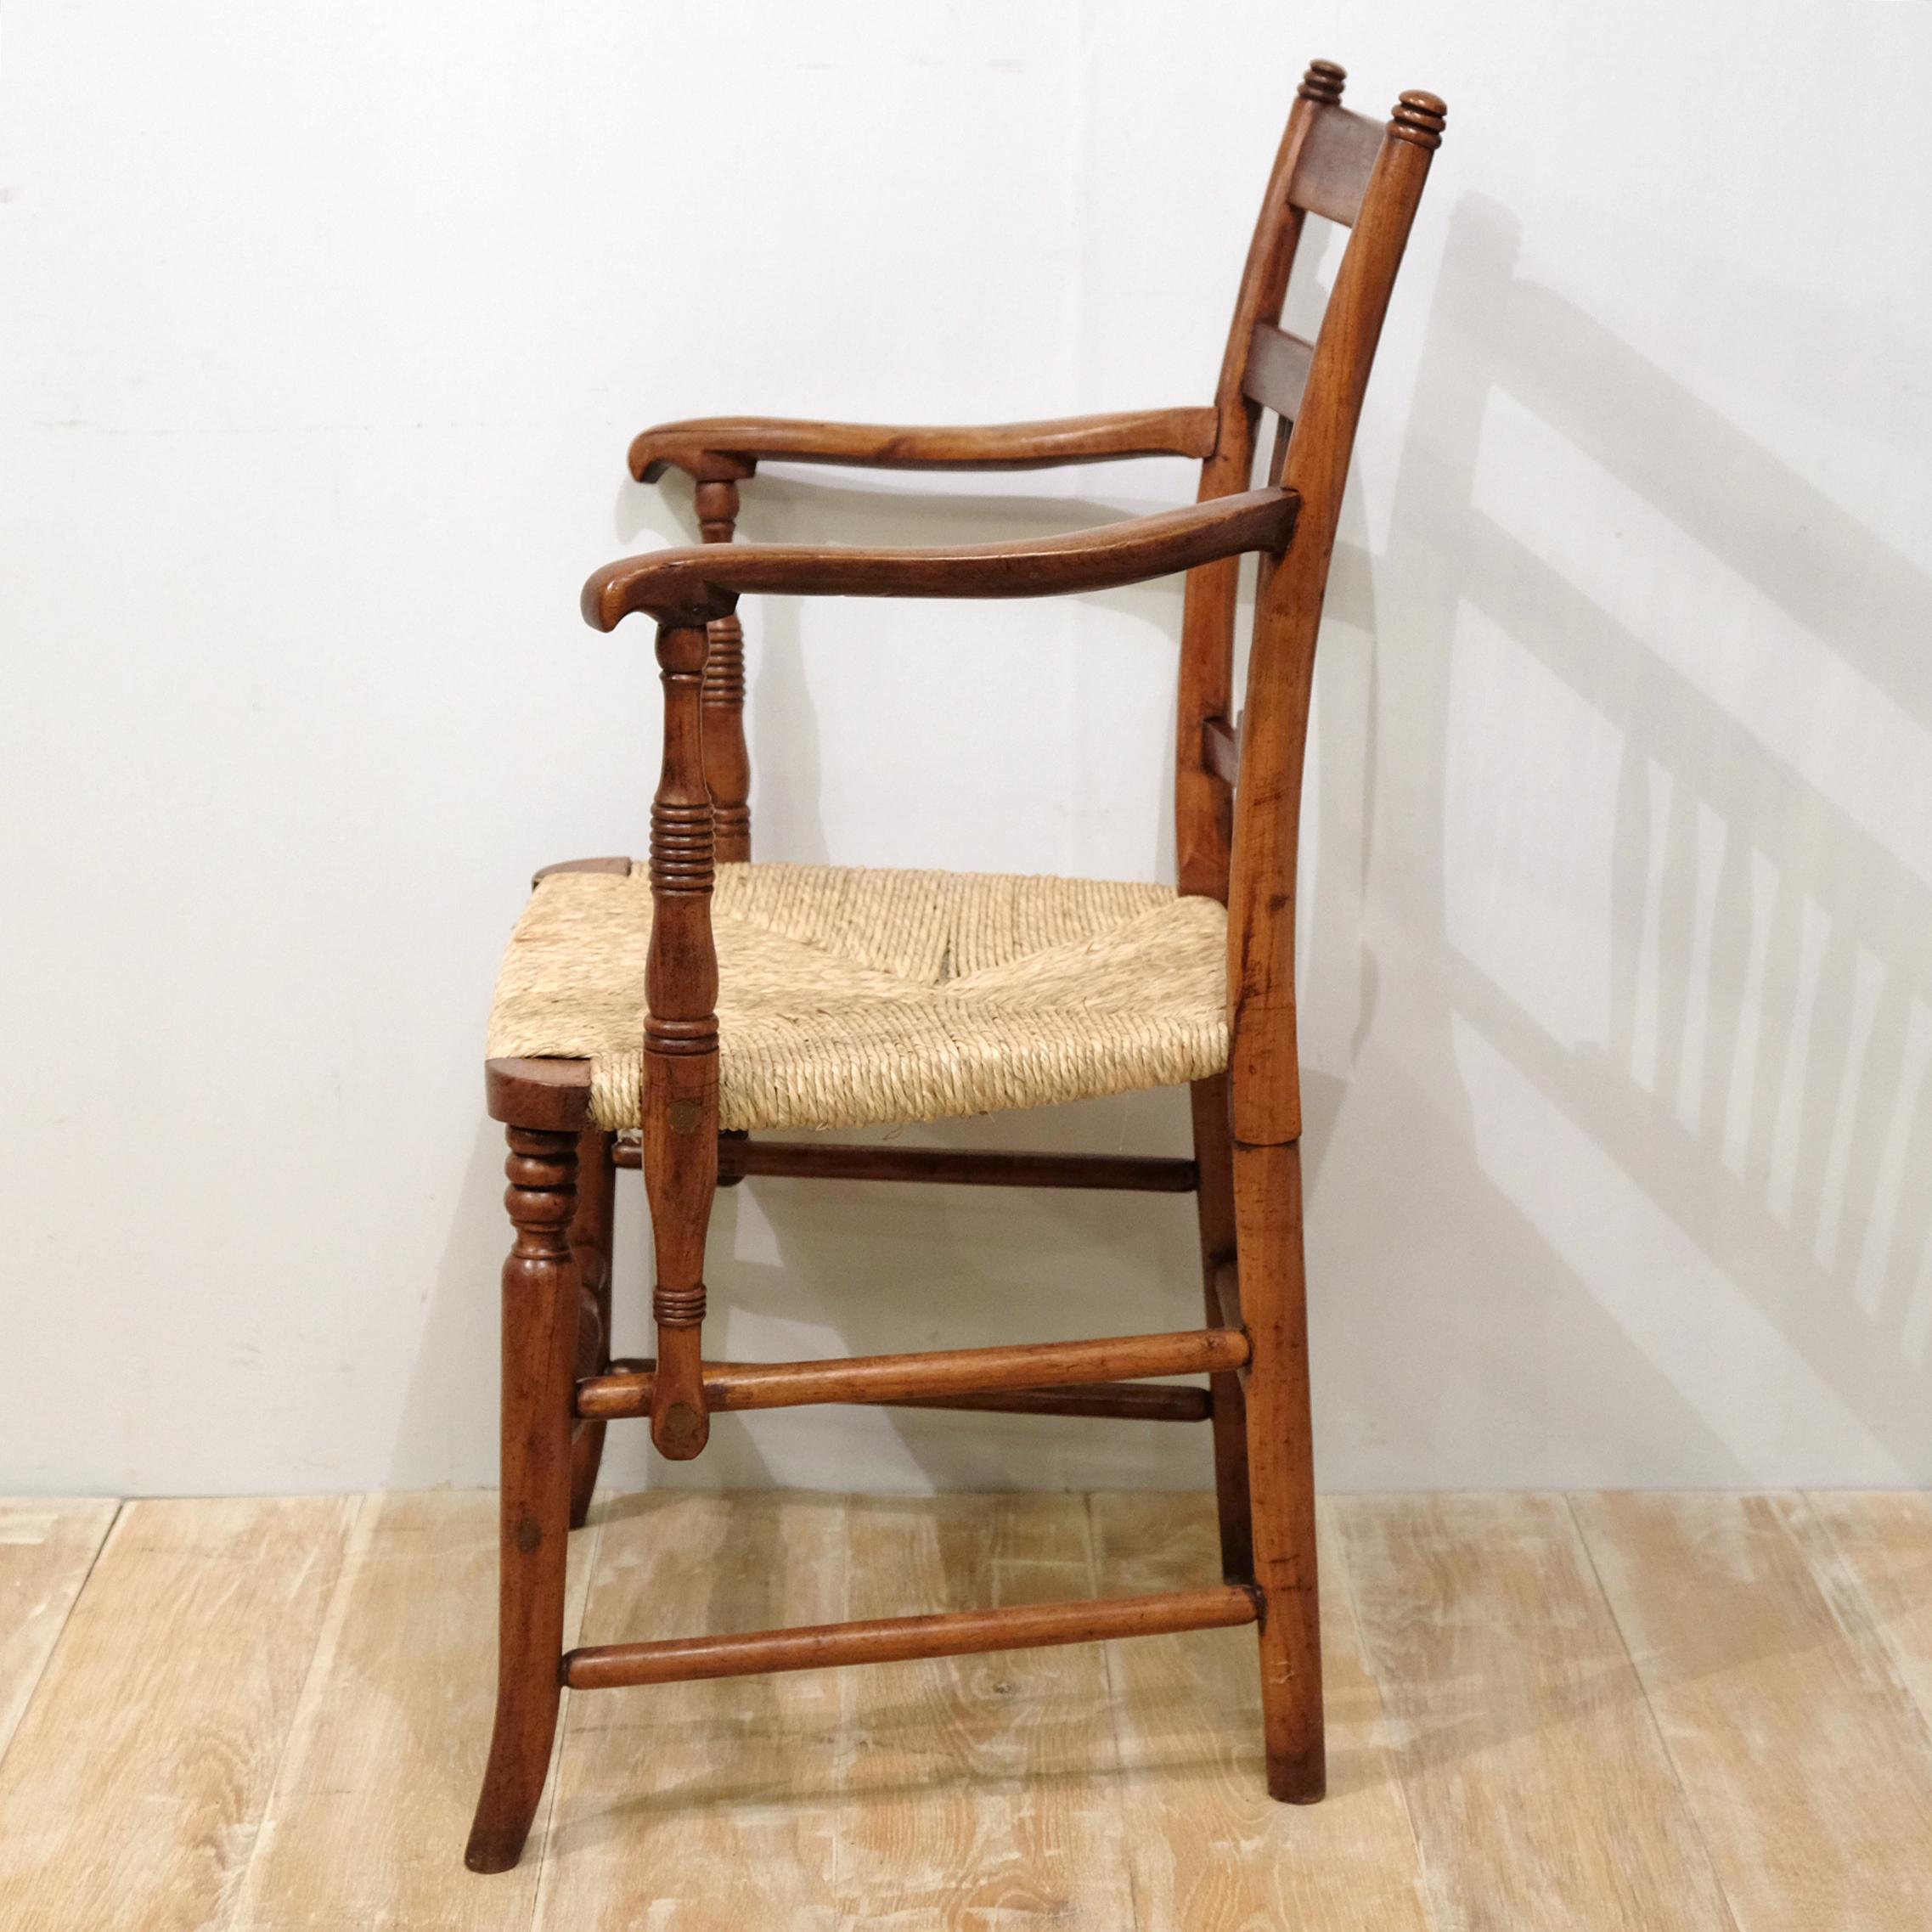 An exceptionally high quality chair in fruitwood with rush seat (recently re-rushed). Attributed to Sussex with its similarities in design to the chairs of Morris & Co but with distinct influences from East Anglia and the United States. Sculpturally